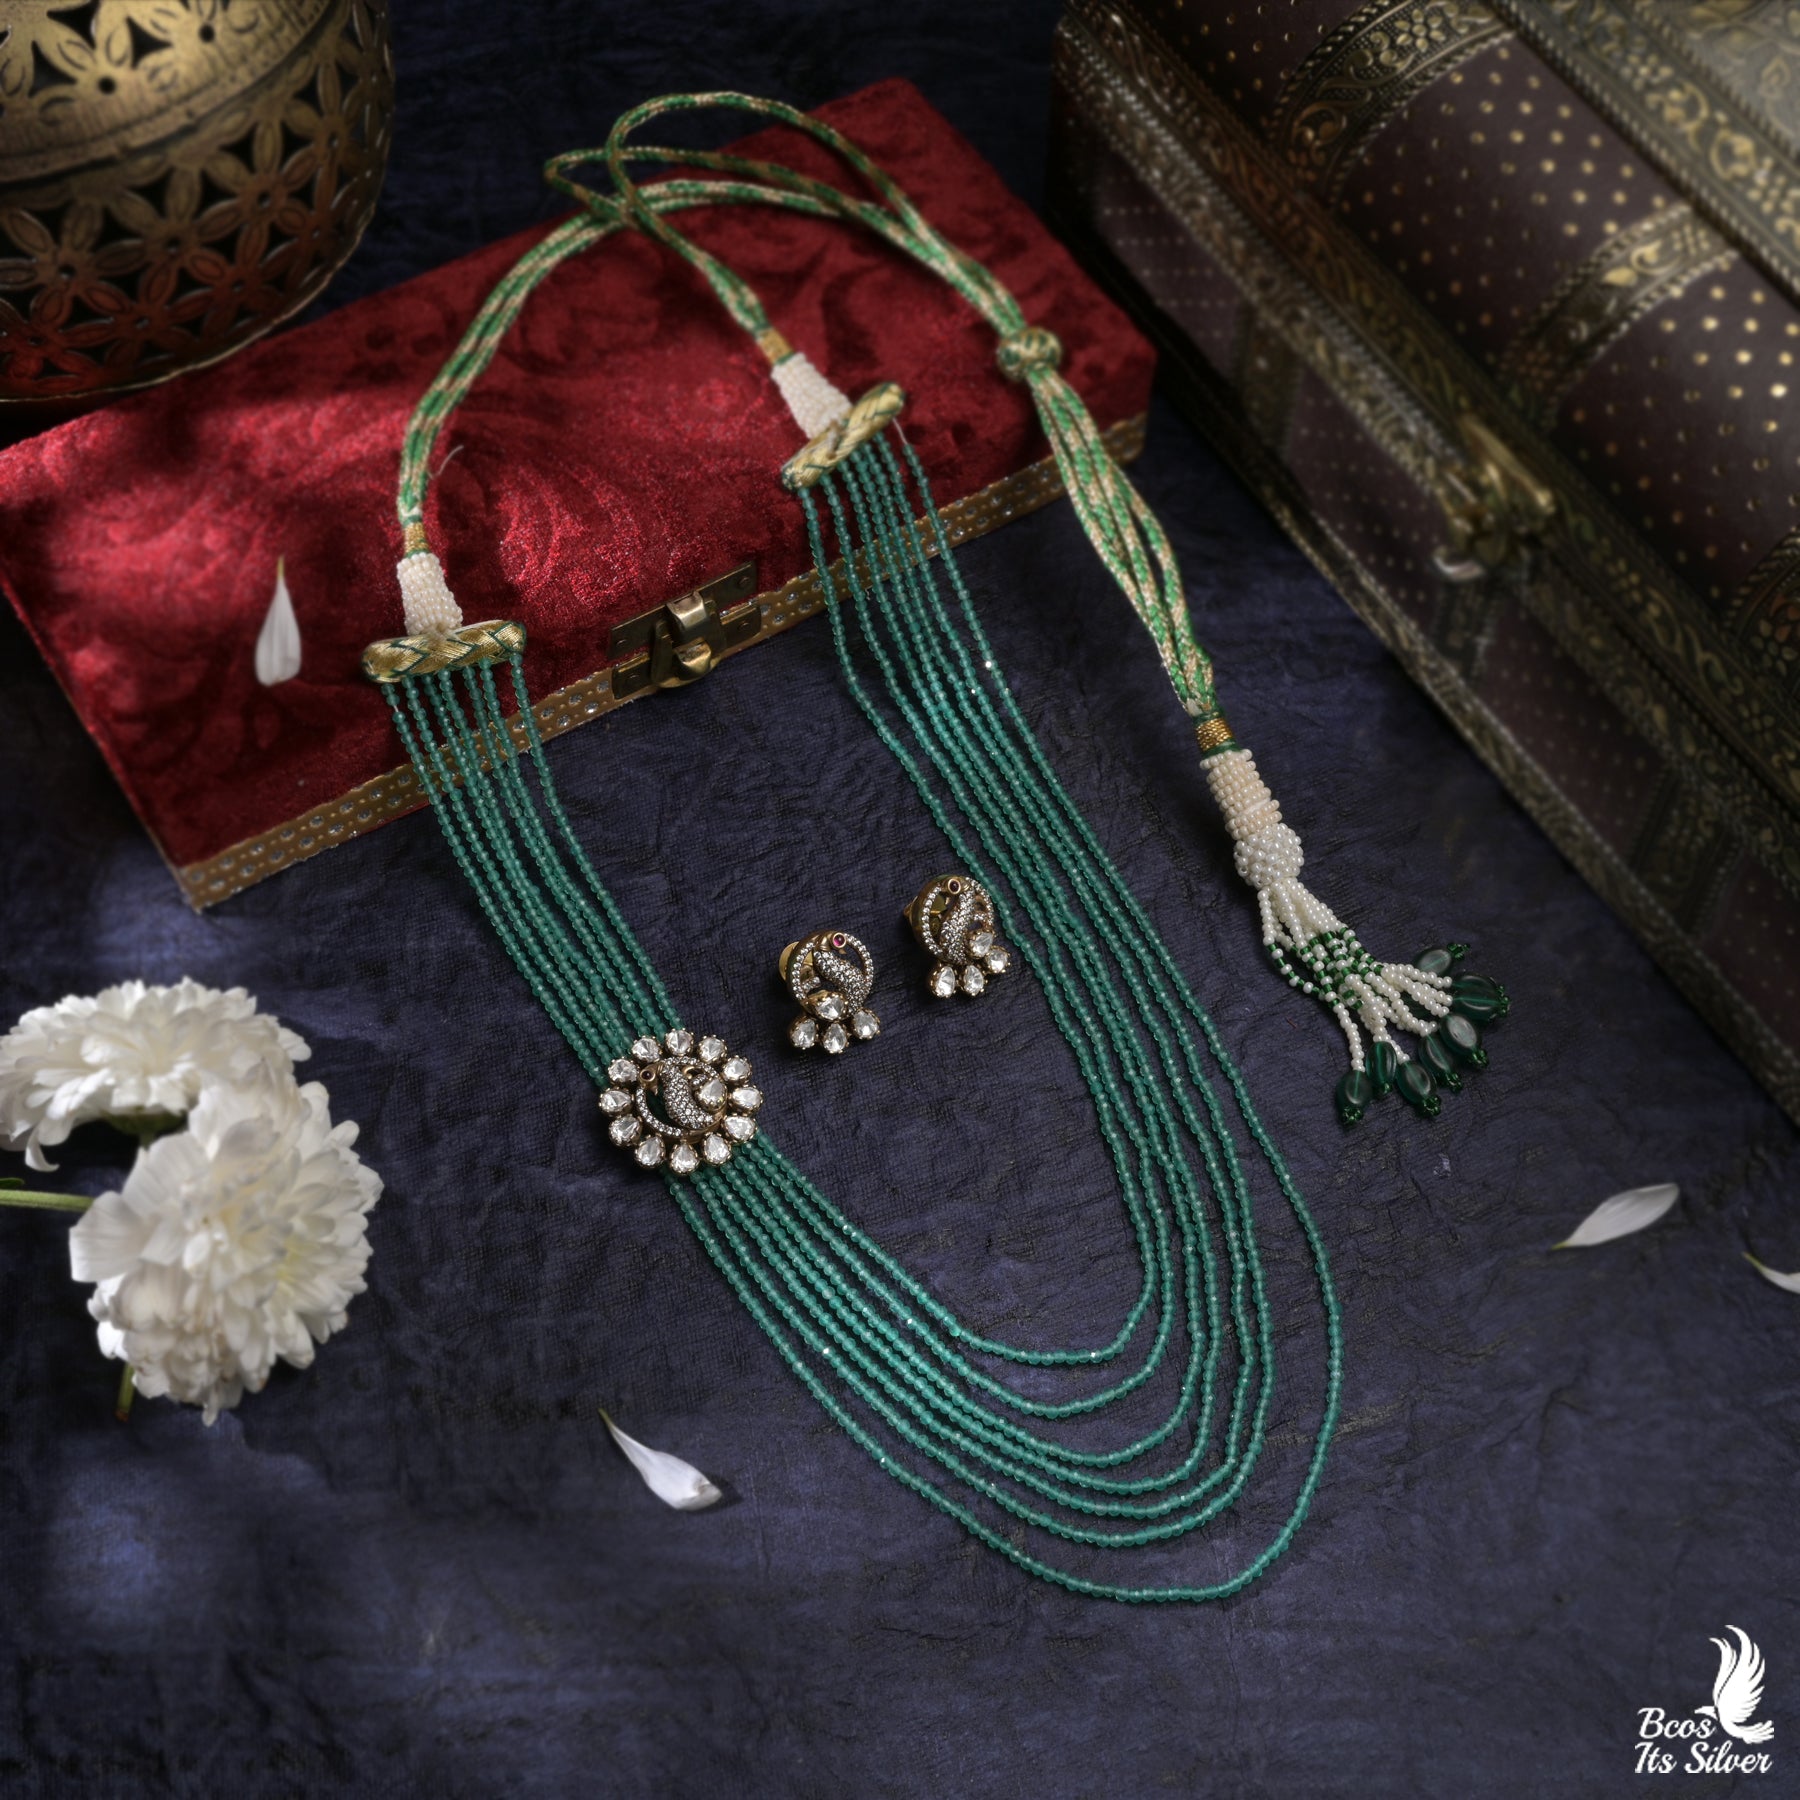 Victorian Beads Haram with Earrings - 5491